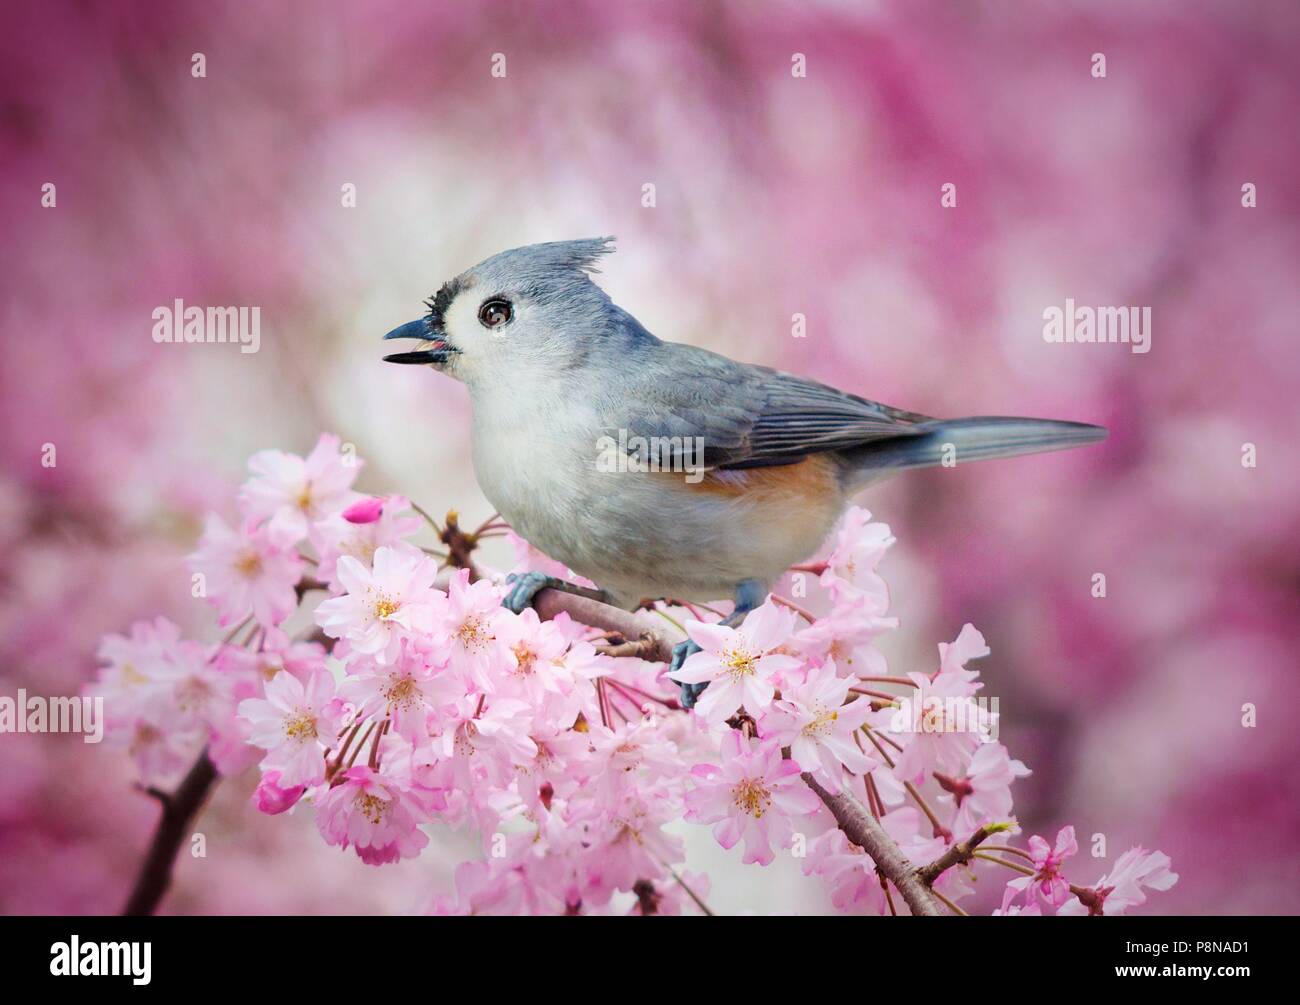 a tufted titmouse perched in a pink flowering spring tree in full bloom. Stock Photo